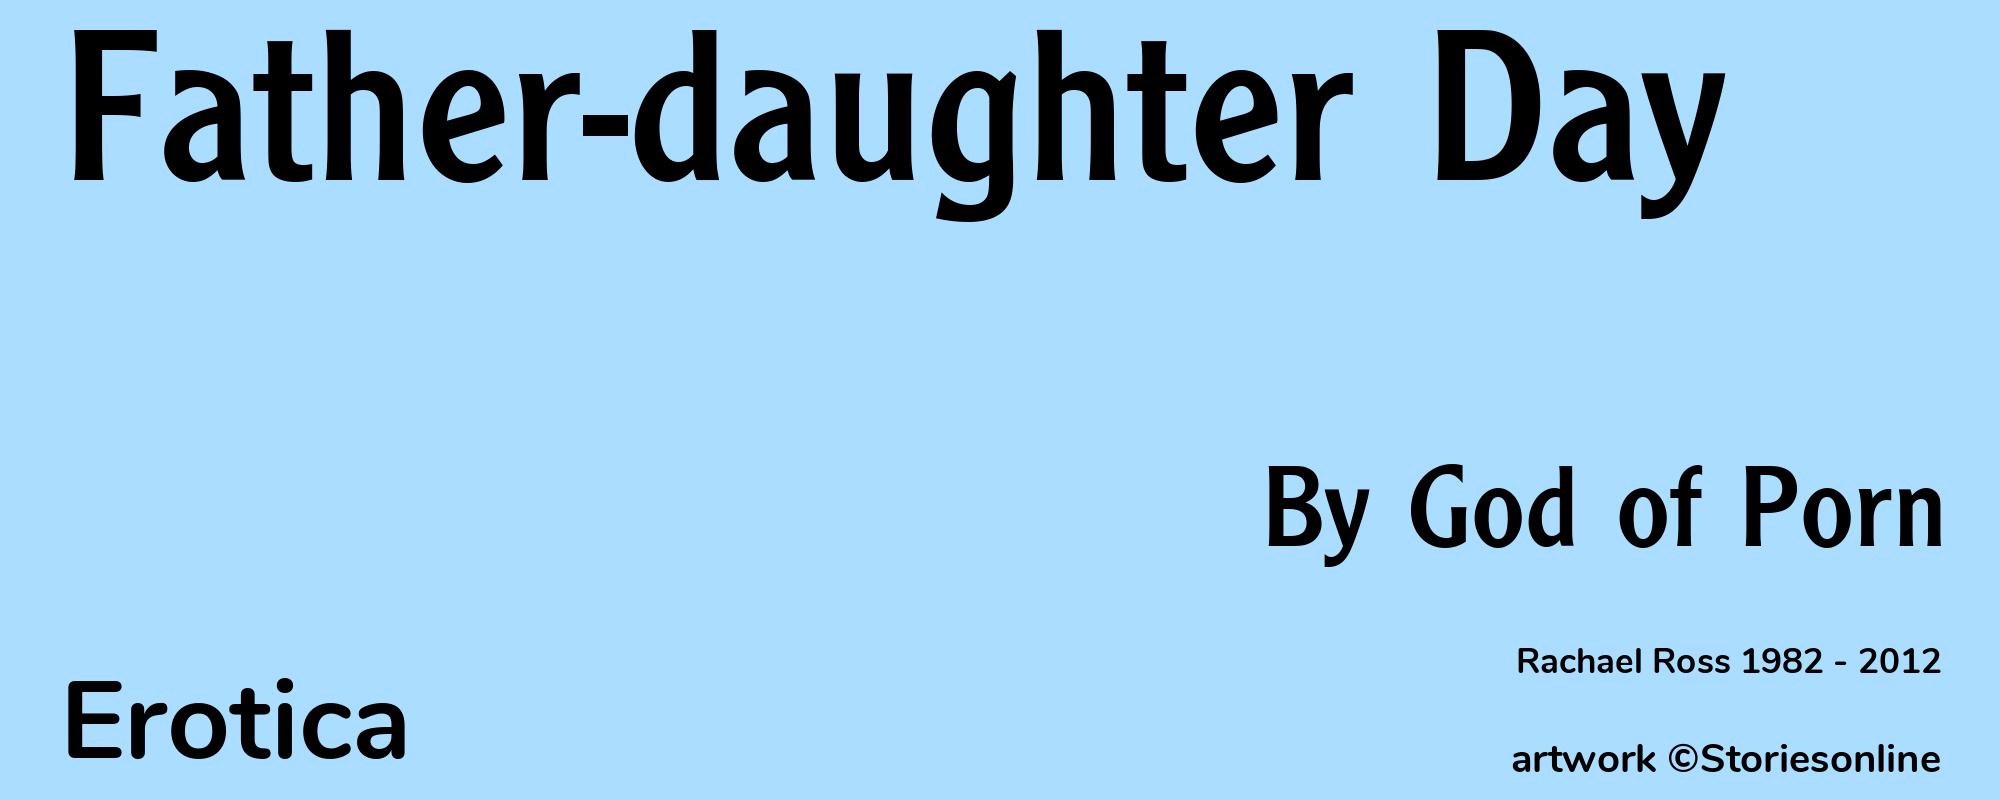 Father-daughter Day - Cover